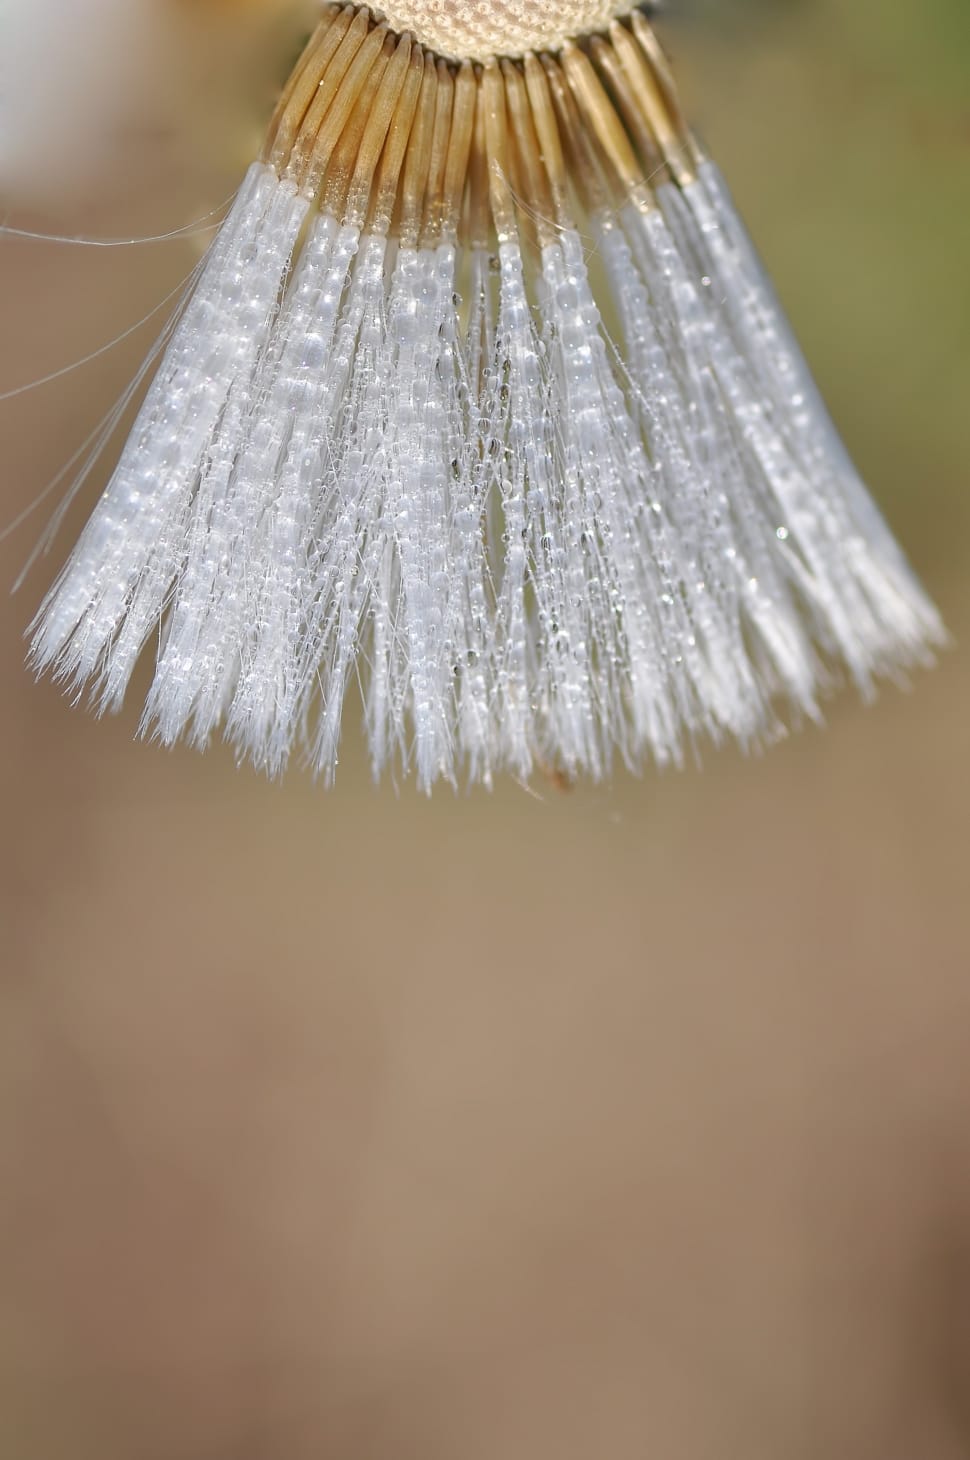 microscopic photography of white dandelion preview